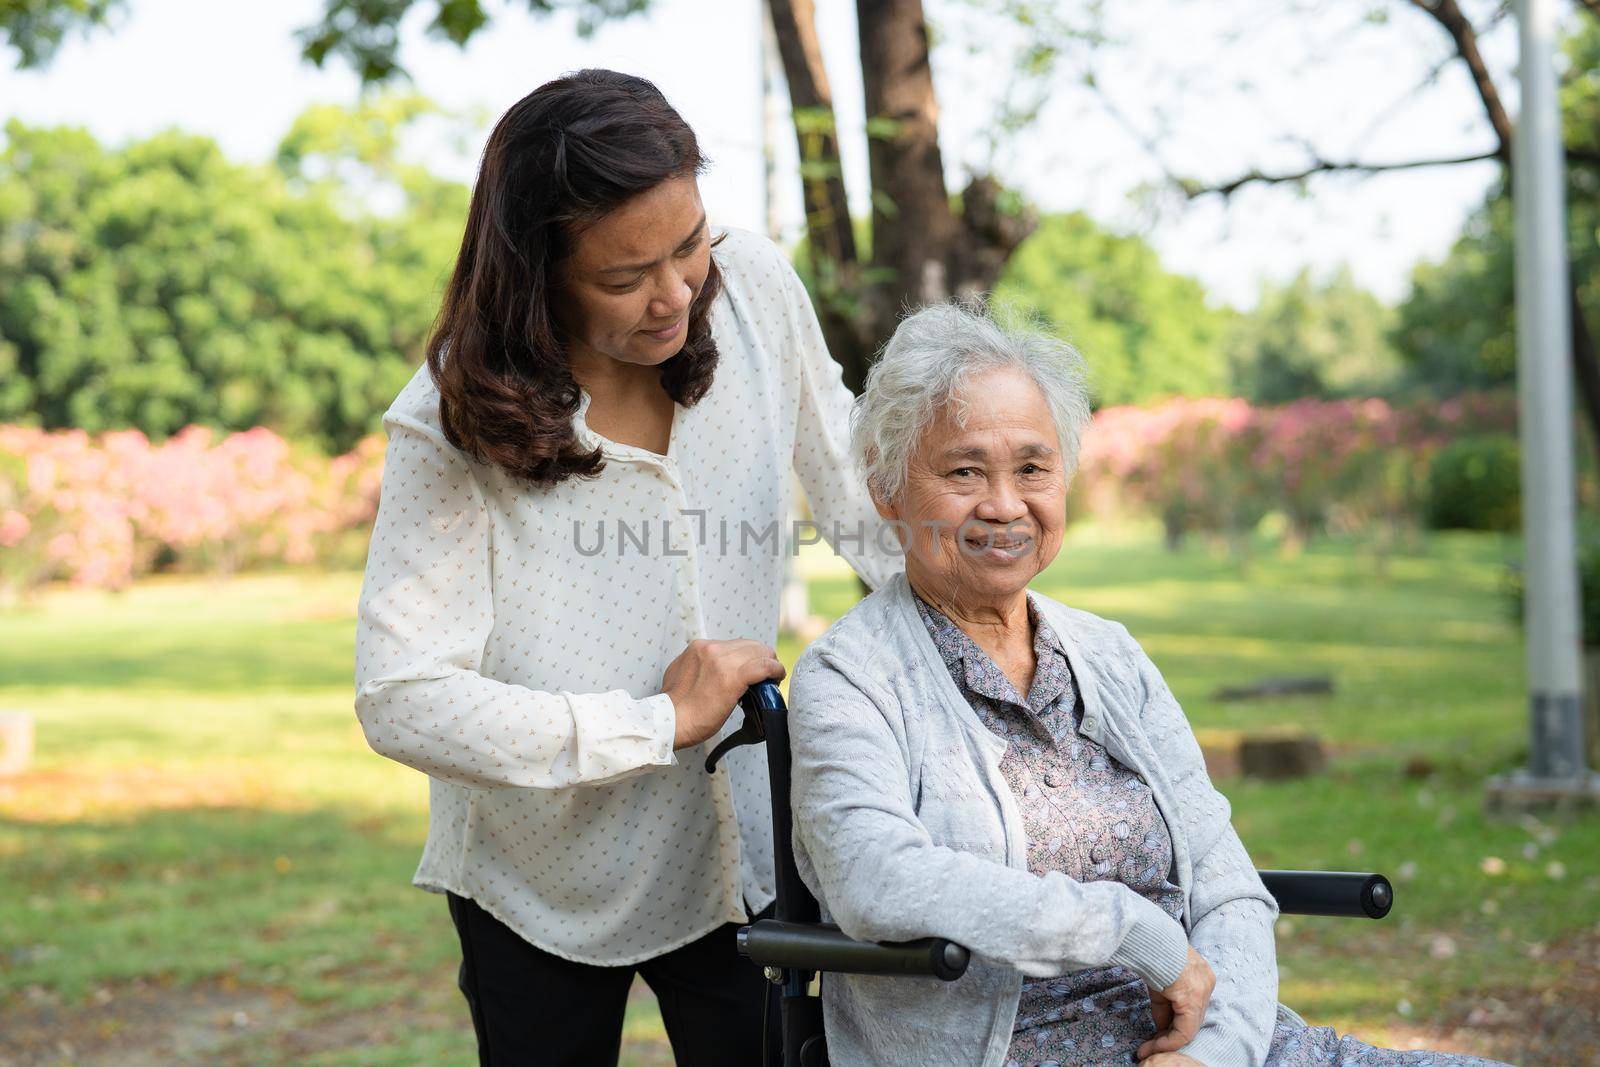 Caregiver help and care Asian senior or elderly old lady woman patient sitting and happy on wheelchair in park, healthy strong medical concept. by pamai